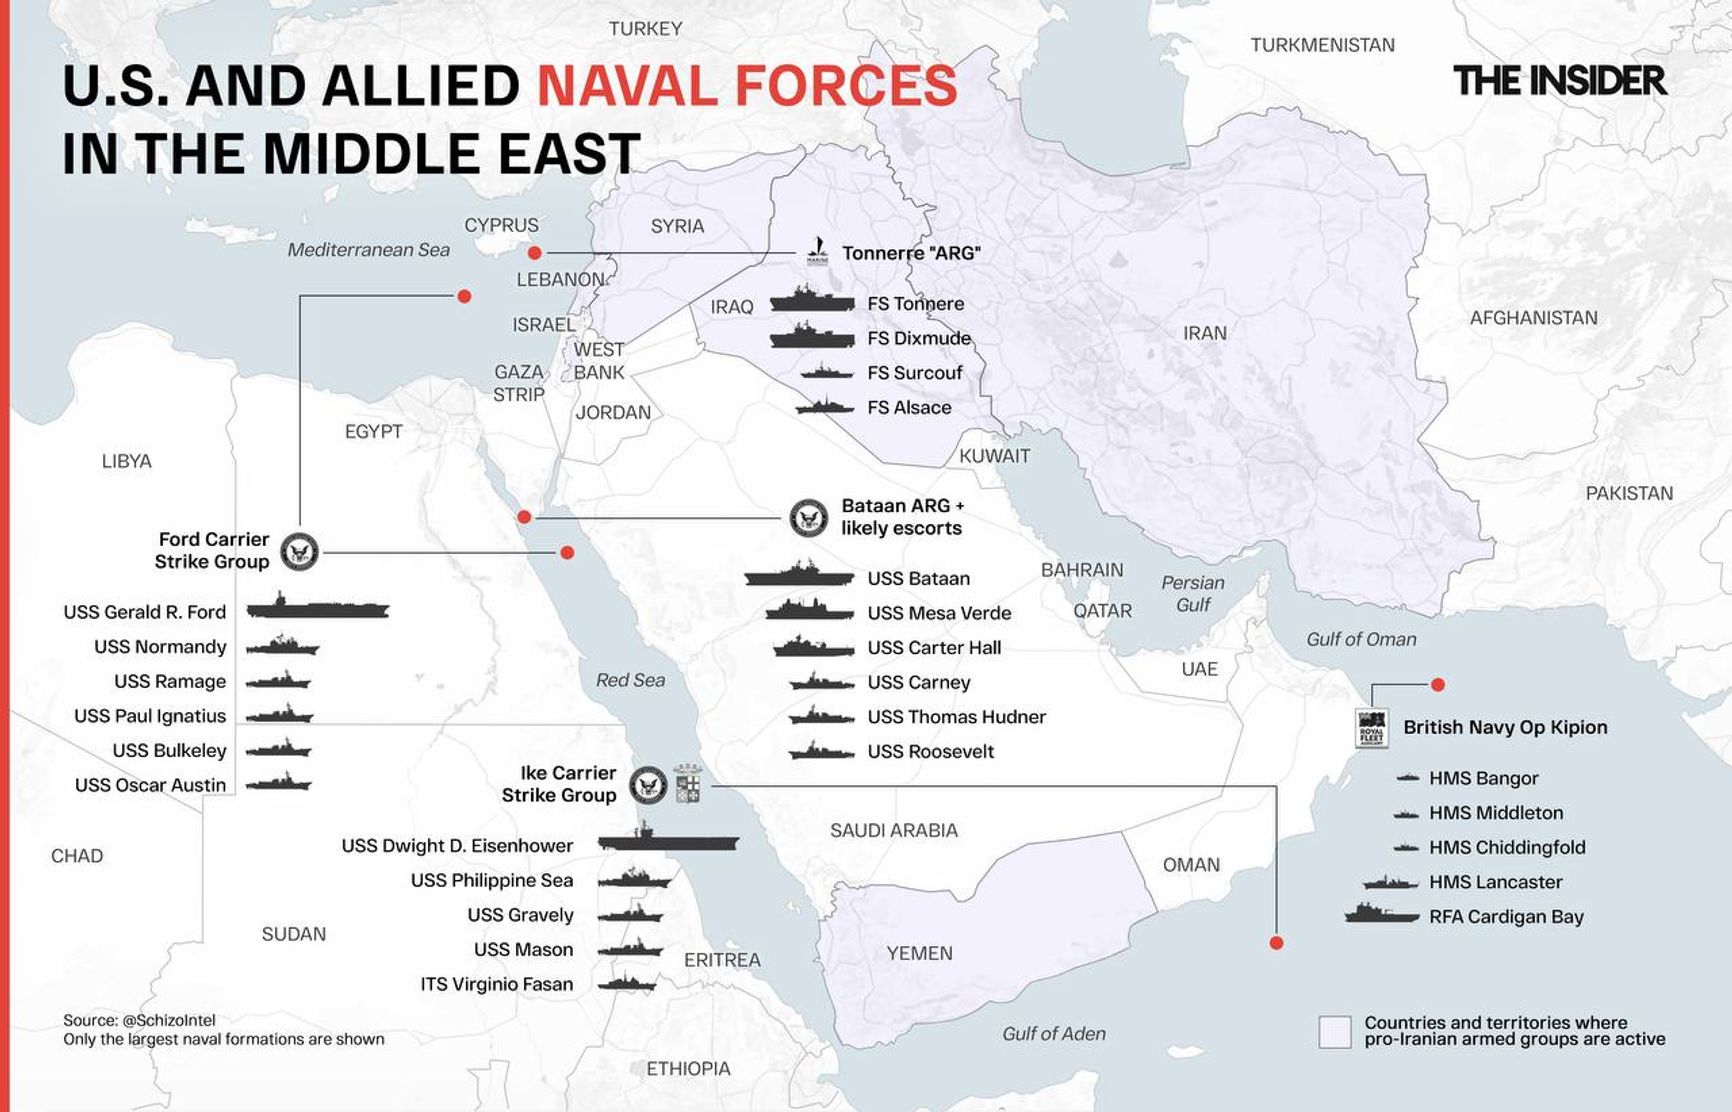 U.S. and allied naval forces within the conflict zone